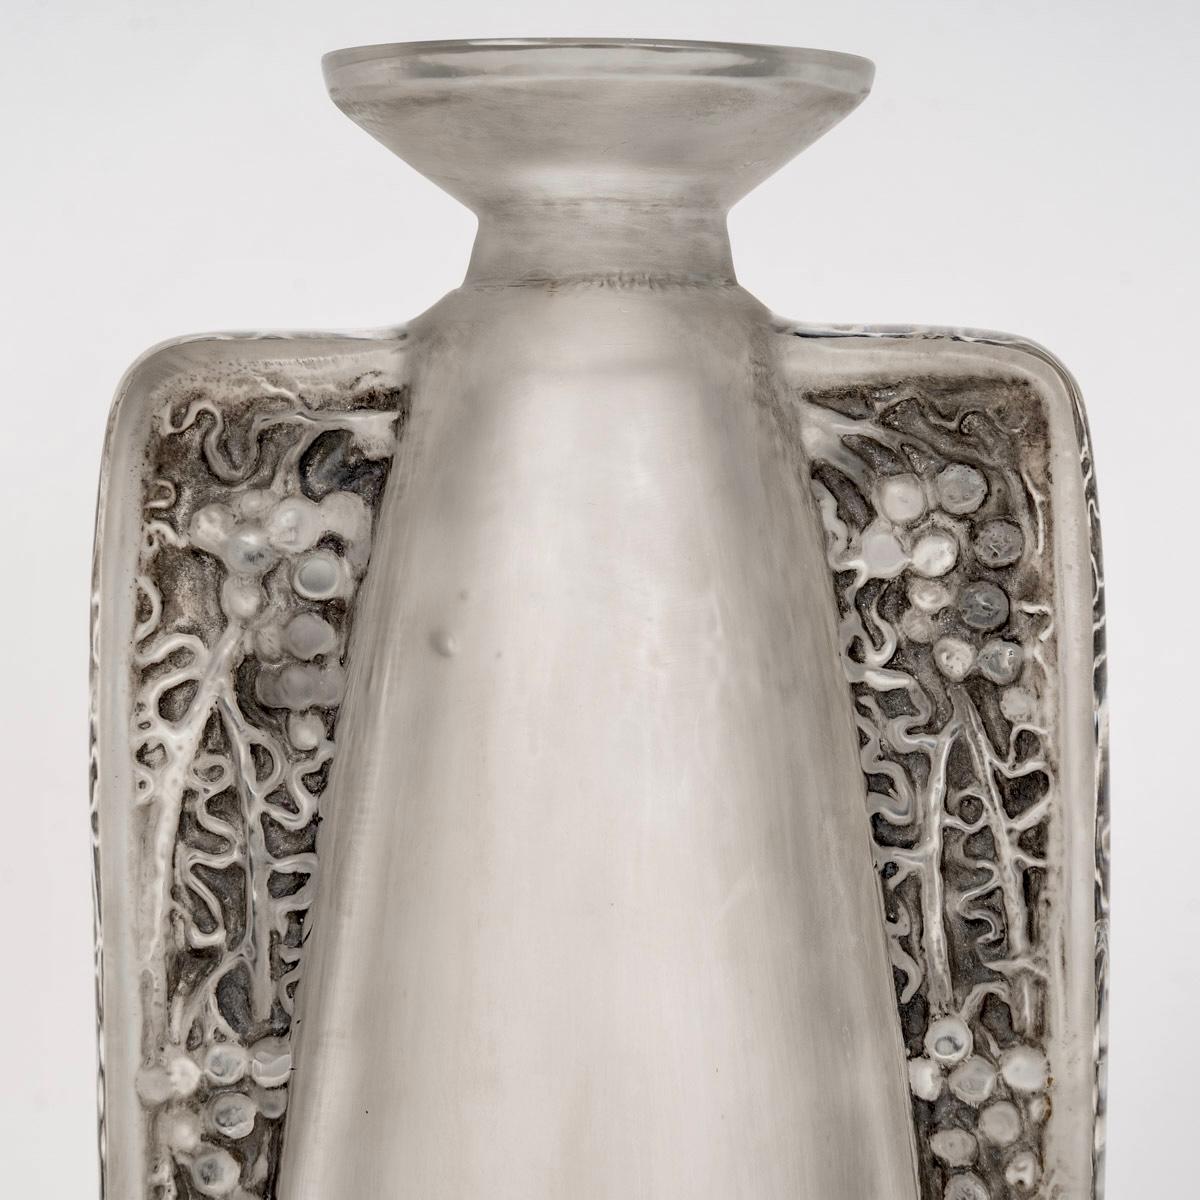 Molded 1911 Rene Lalique Vase Decanter Oreilles Gravees Frosted Glass with Grey Patina